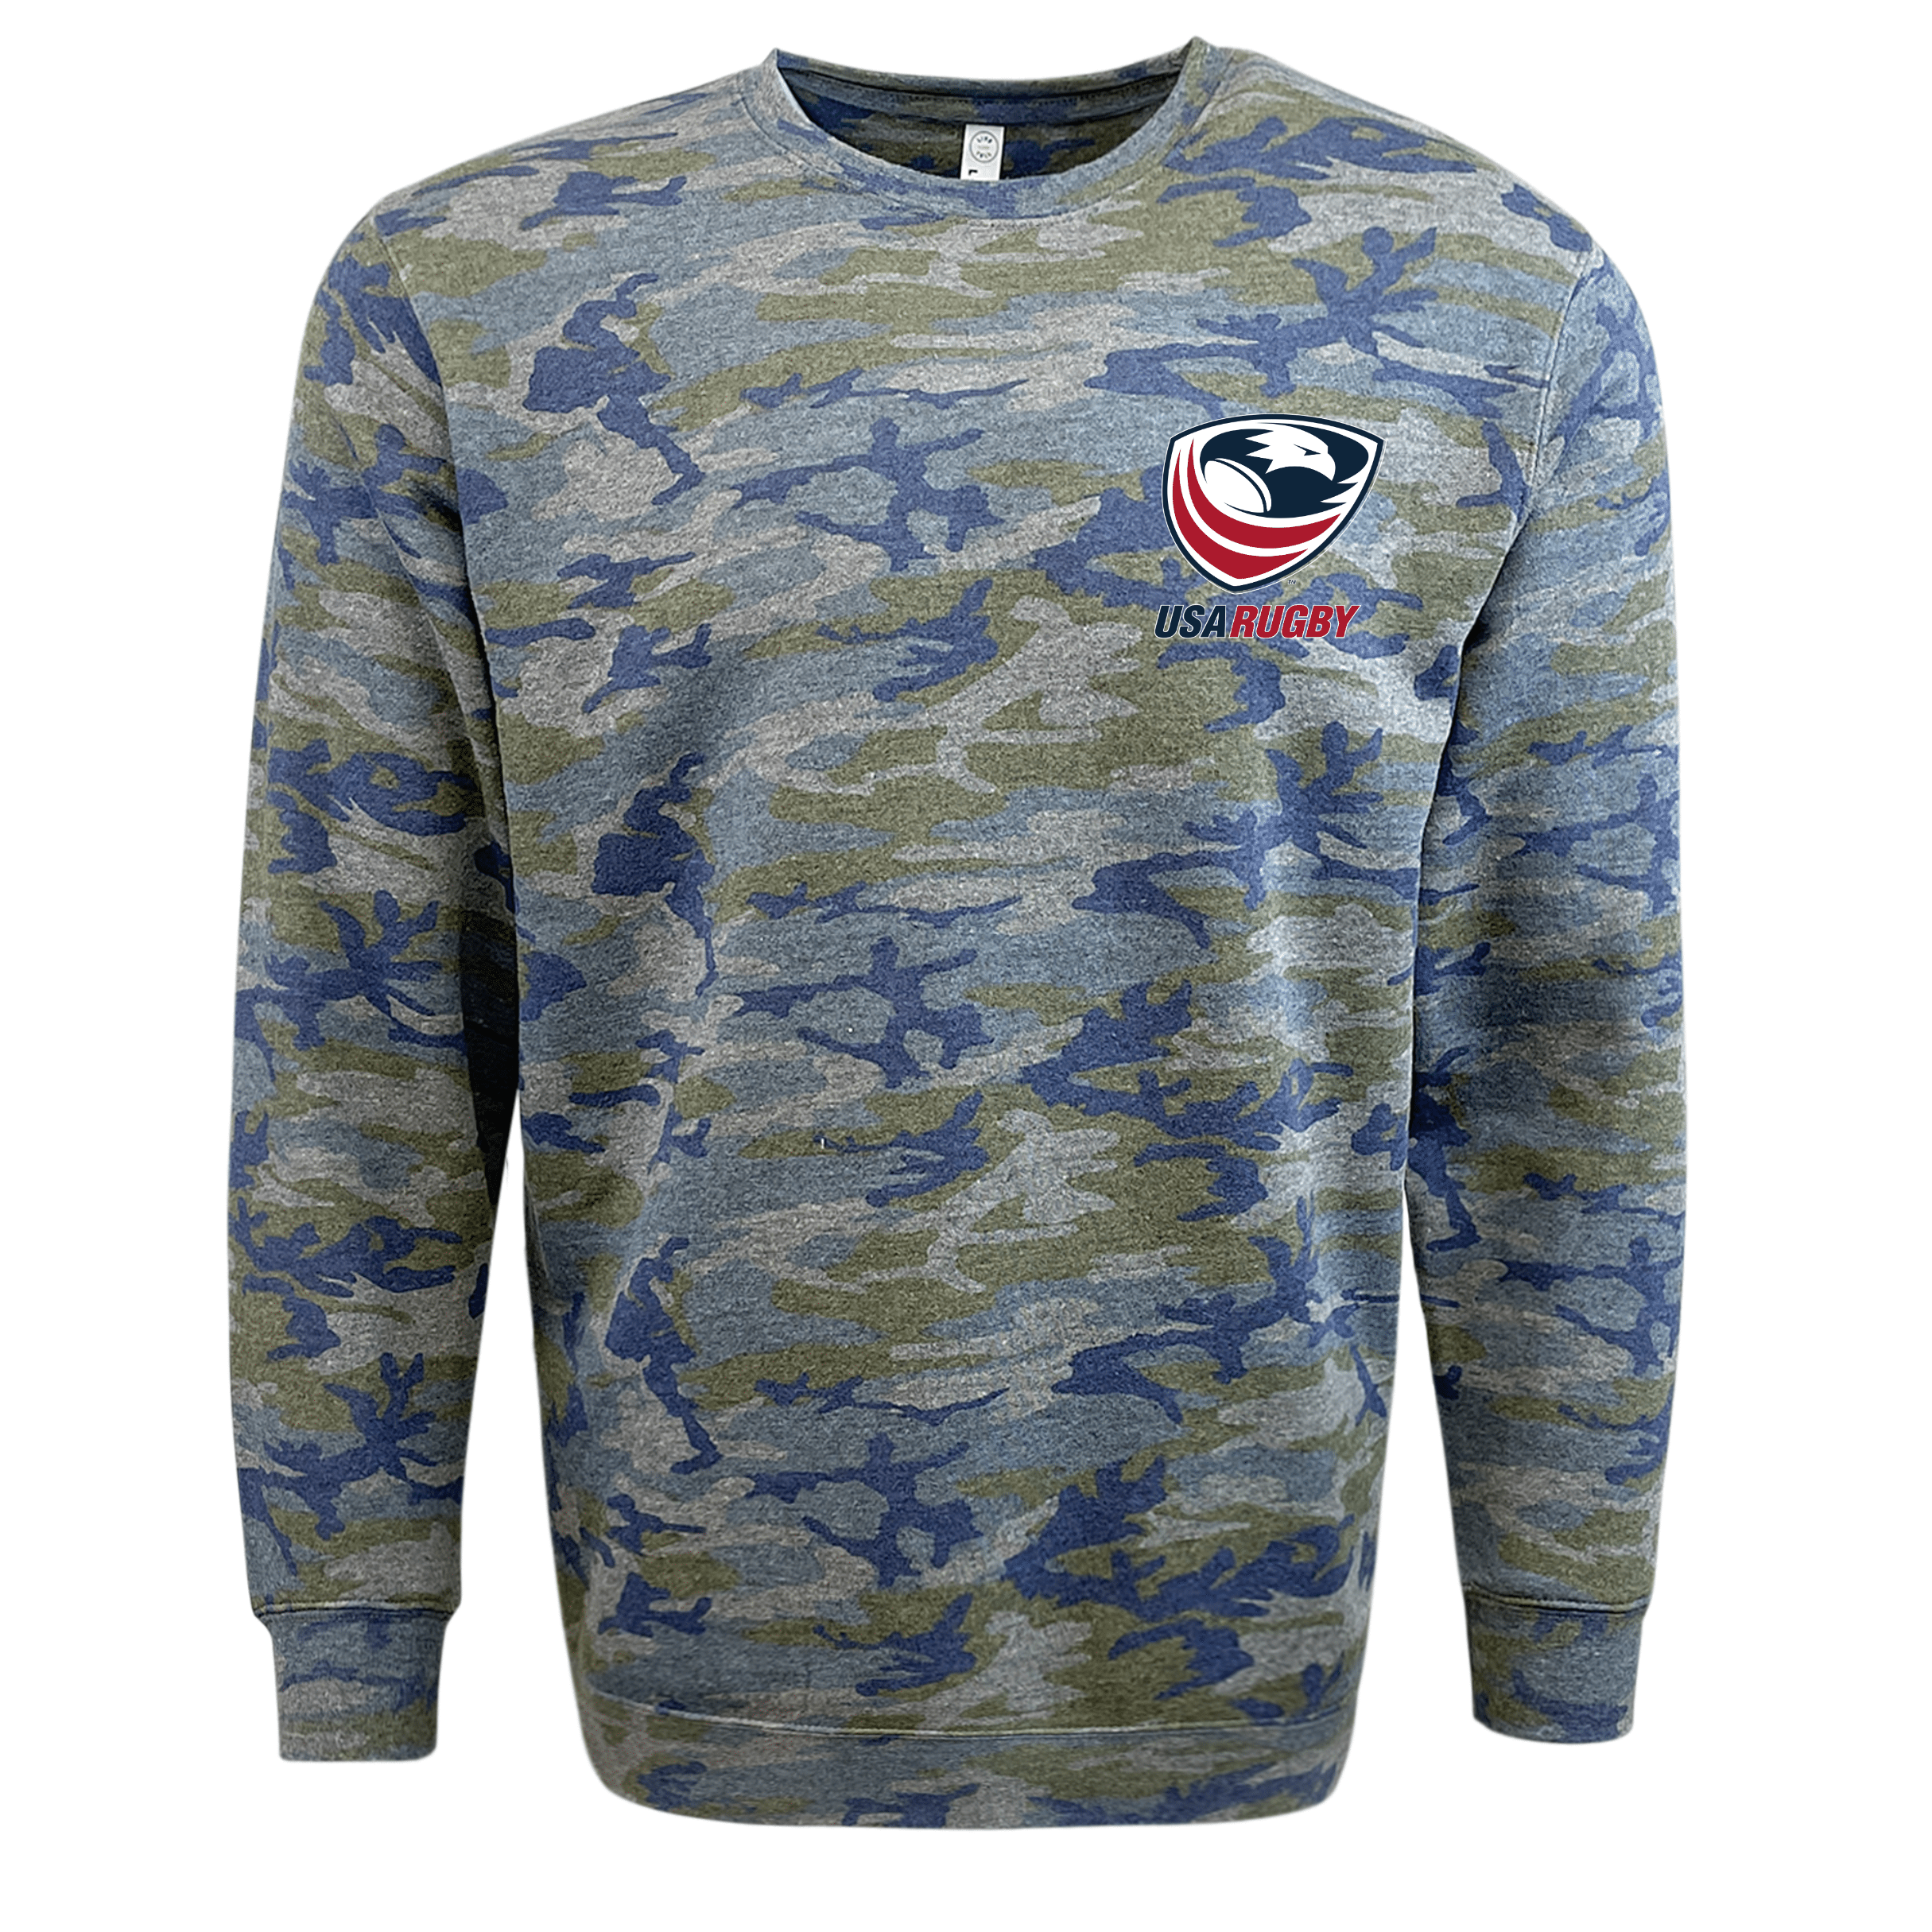 The USA Rugby Collection  Official USA Rugby Gear - World Rugby Shop